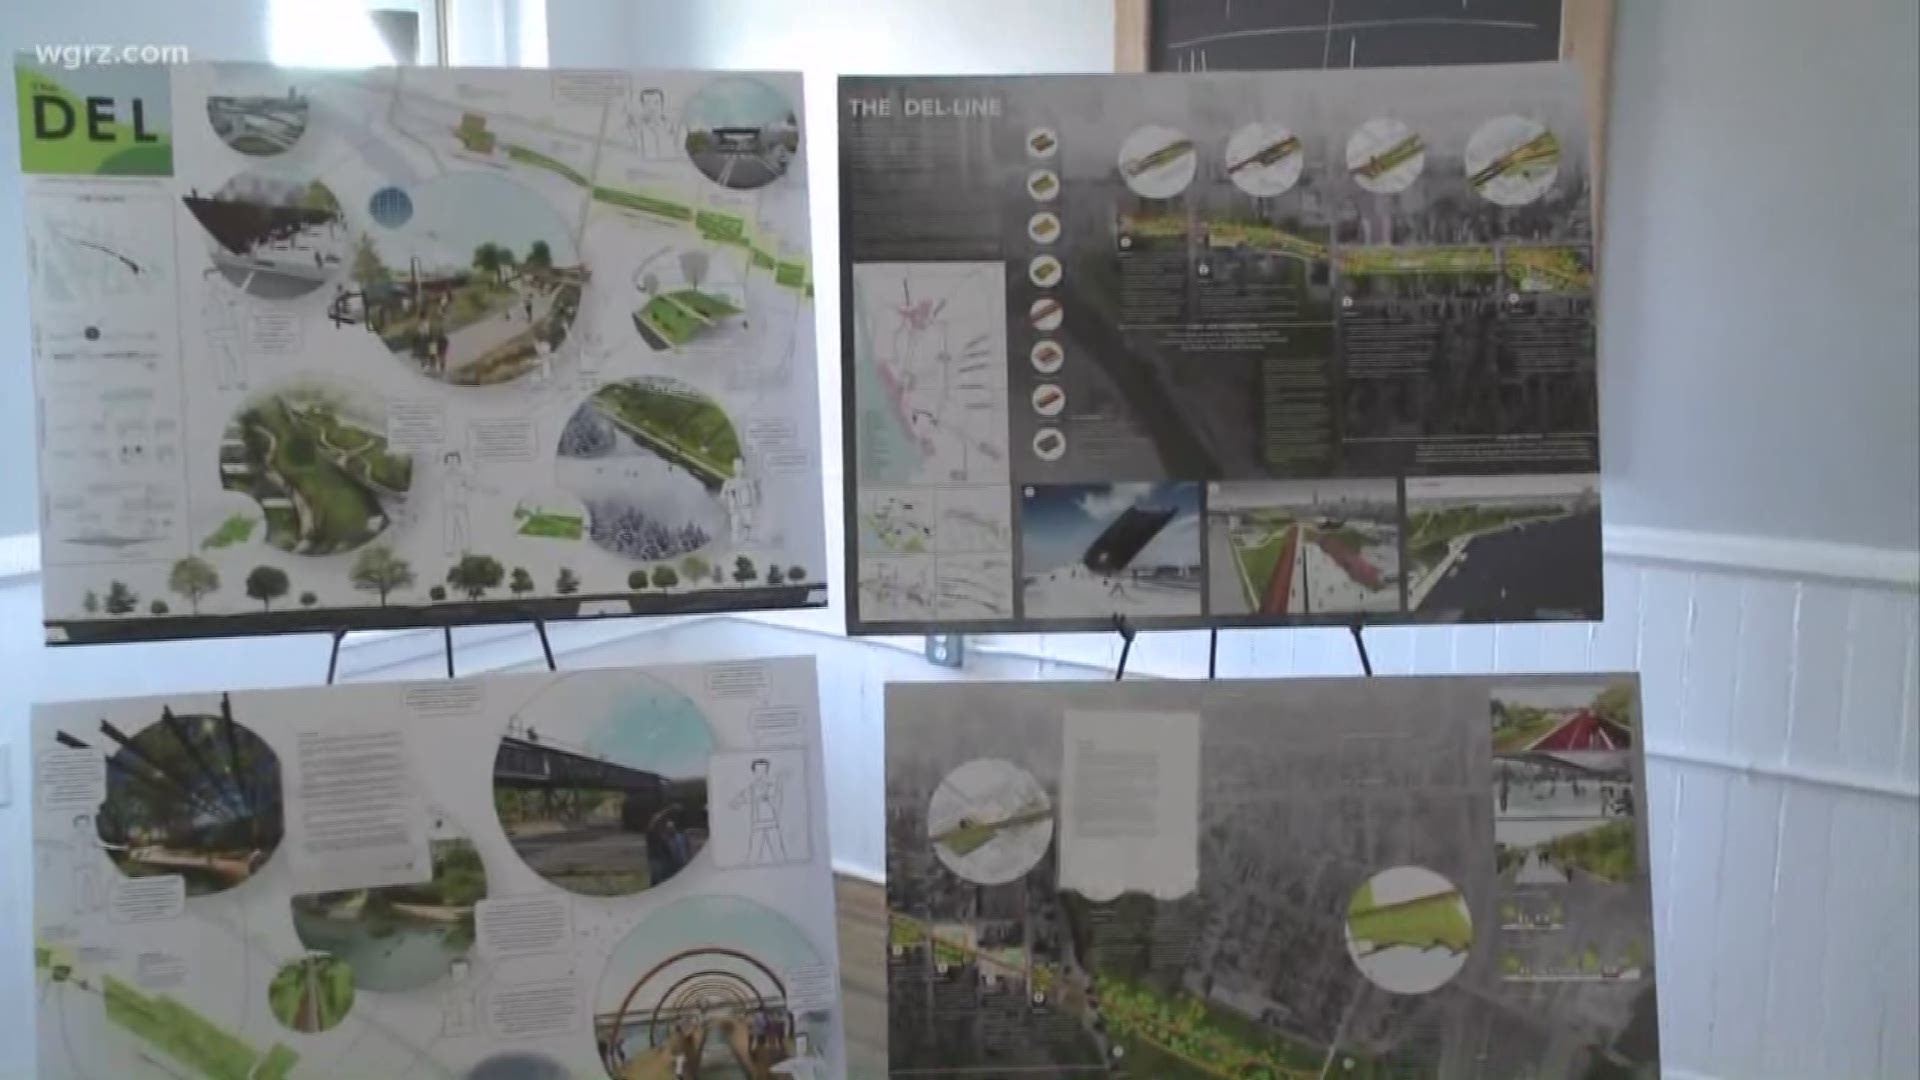 A competititon has been underway between nearly 100 different design proposals...